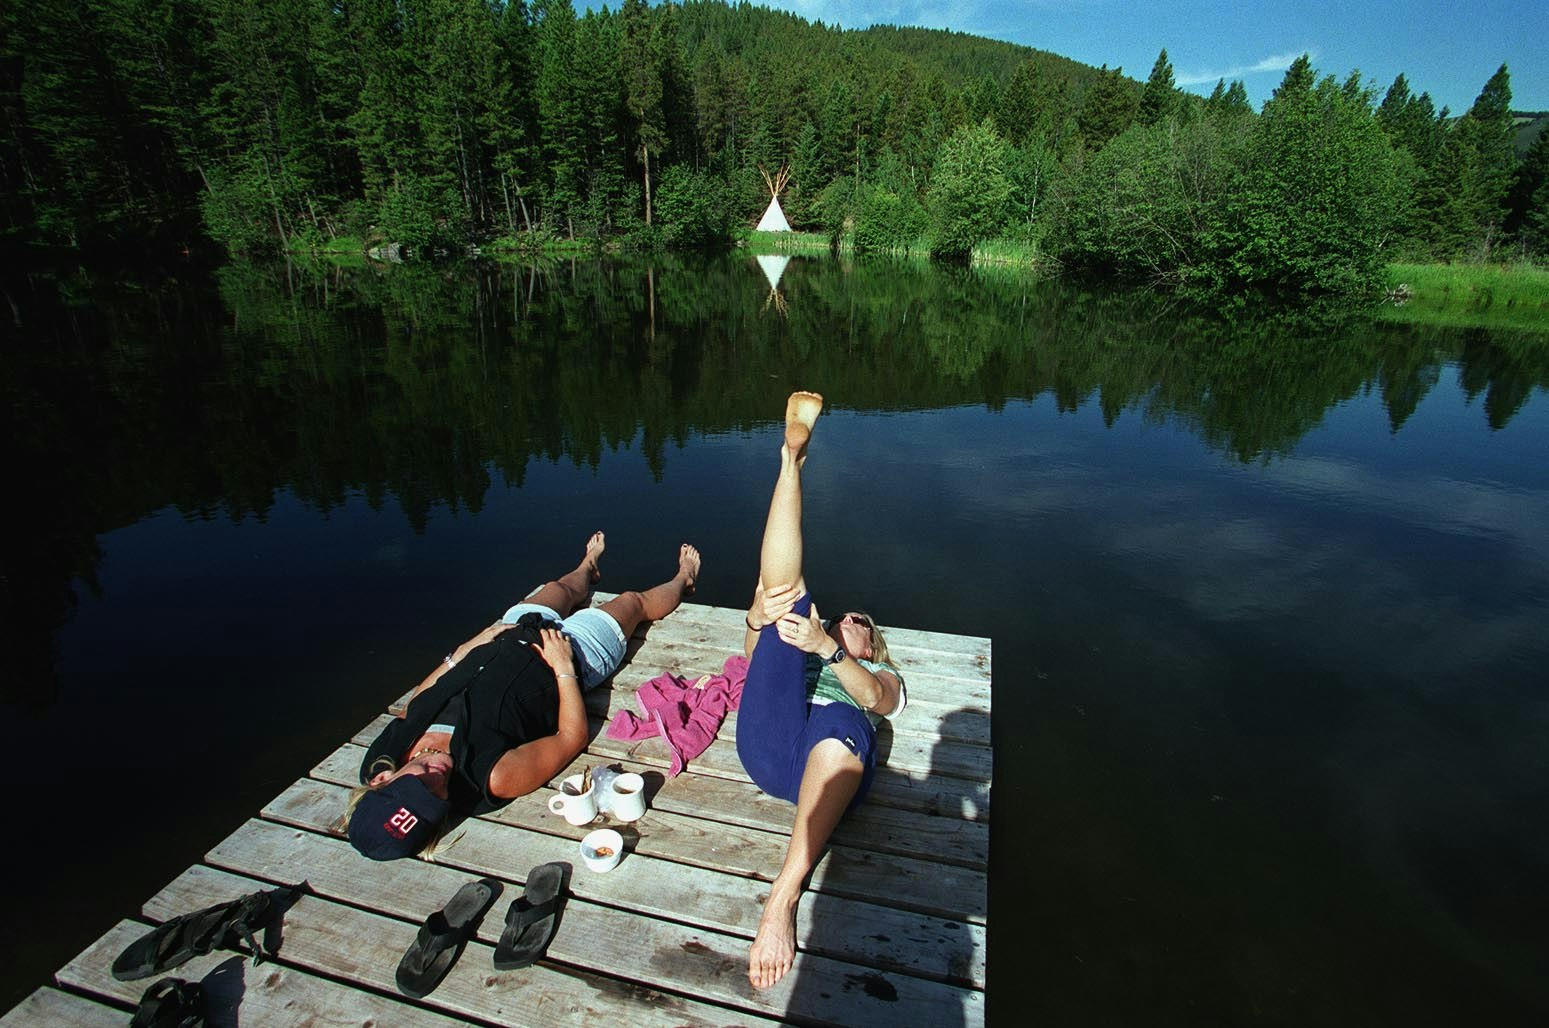 Two women practice yoga on a dock at Feathered Pipe Ranch in Helena Montana. Between them sits a white tea set. In the distance, on the opposite shore of the blue lake, are deep green trees and a white tipi.